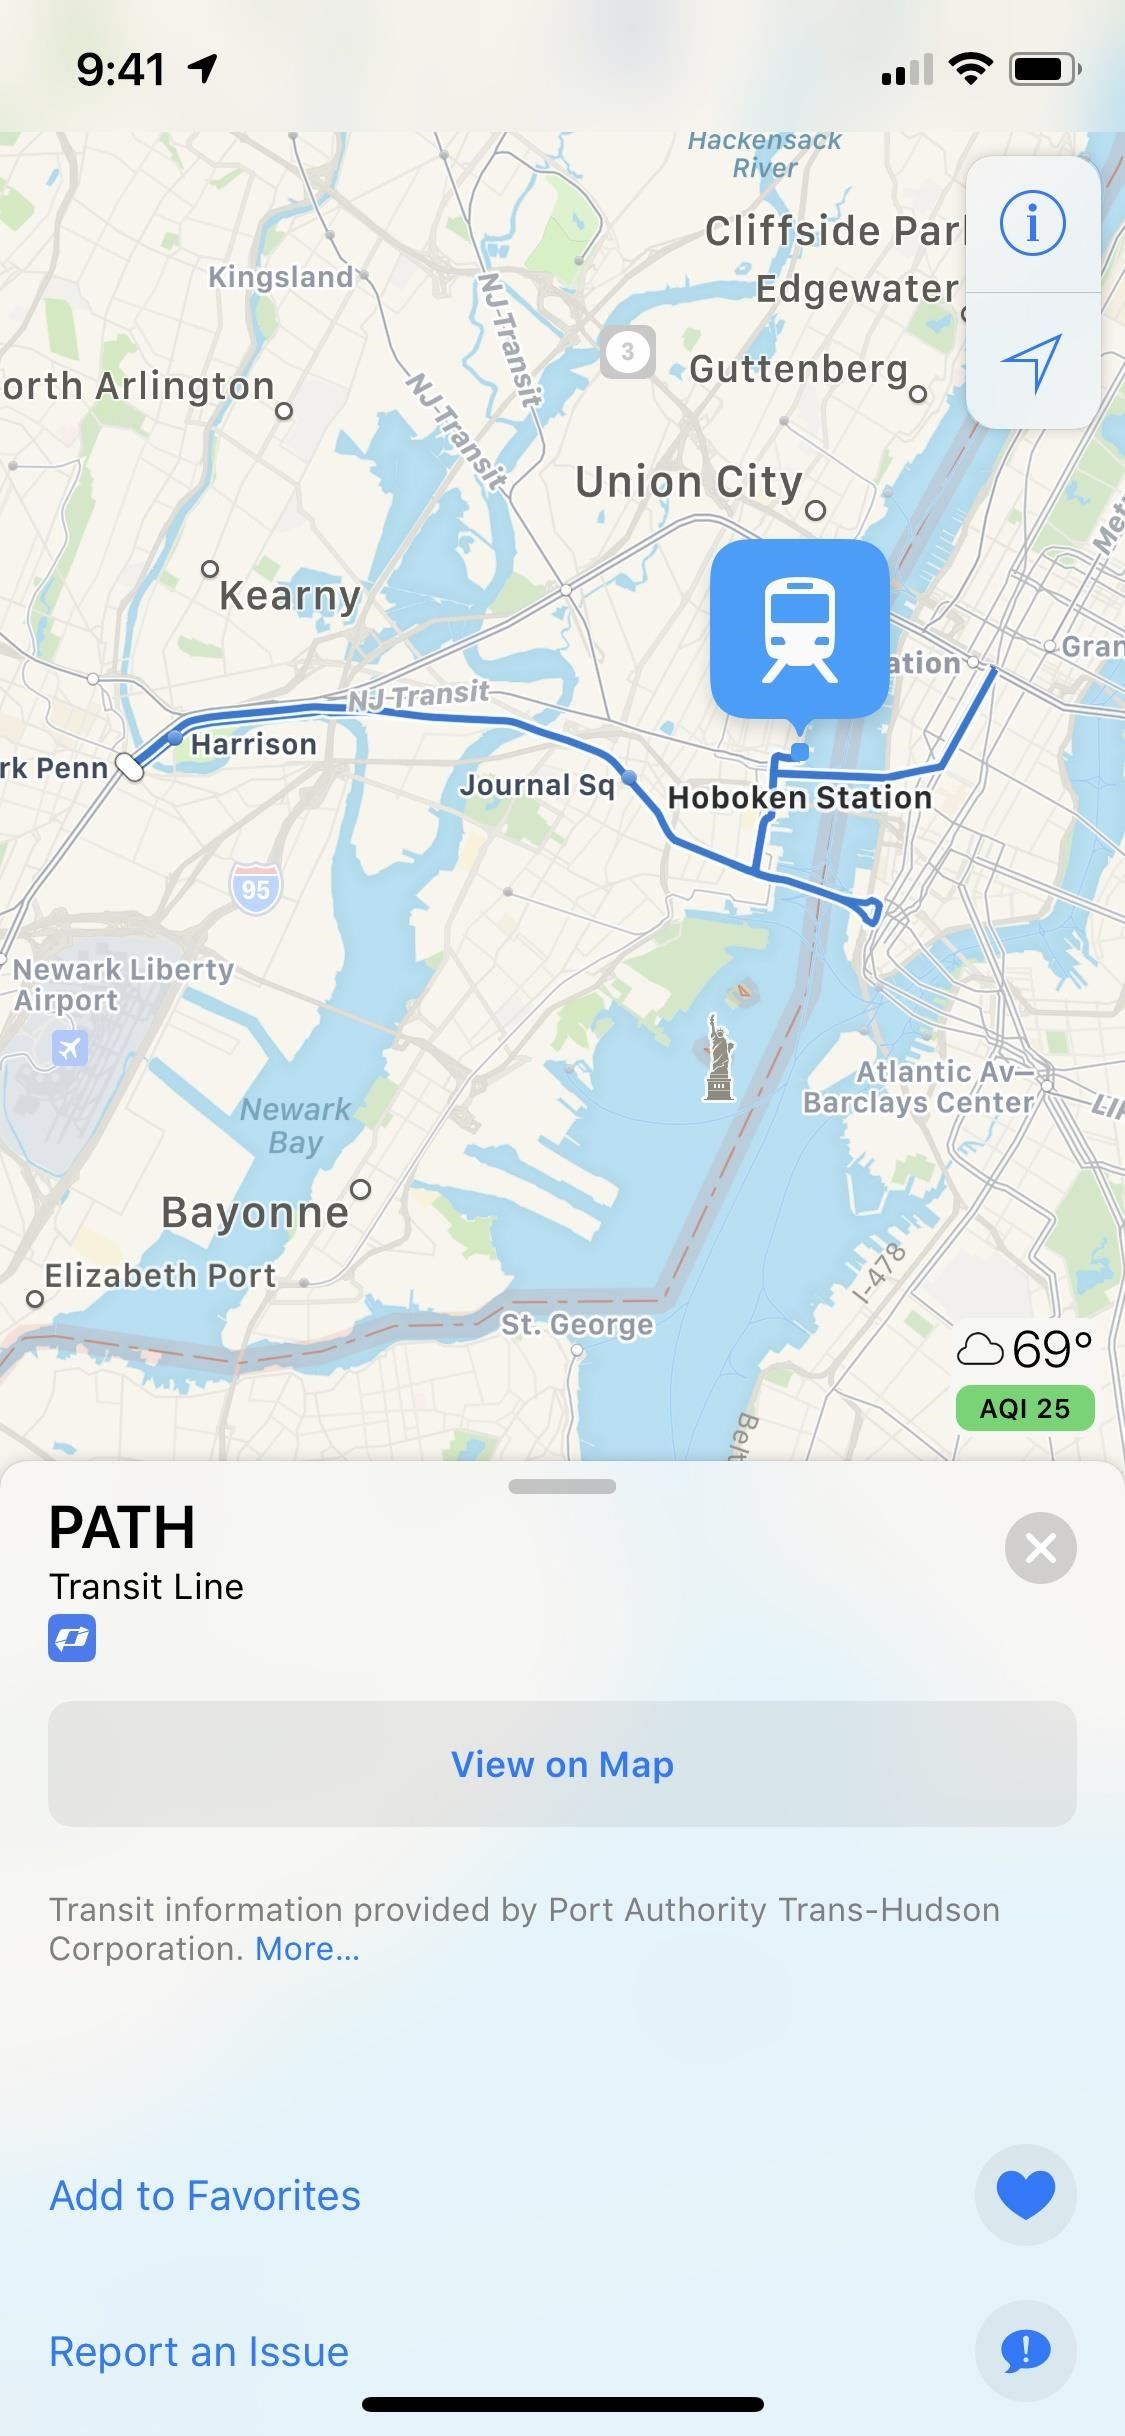 14 Apple Maps Features & Changes in iOS 13 You Need to Know About